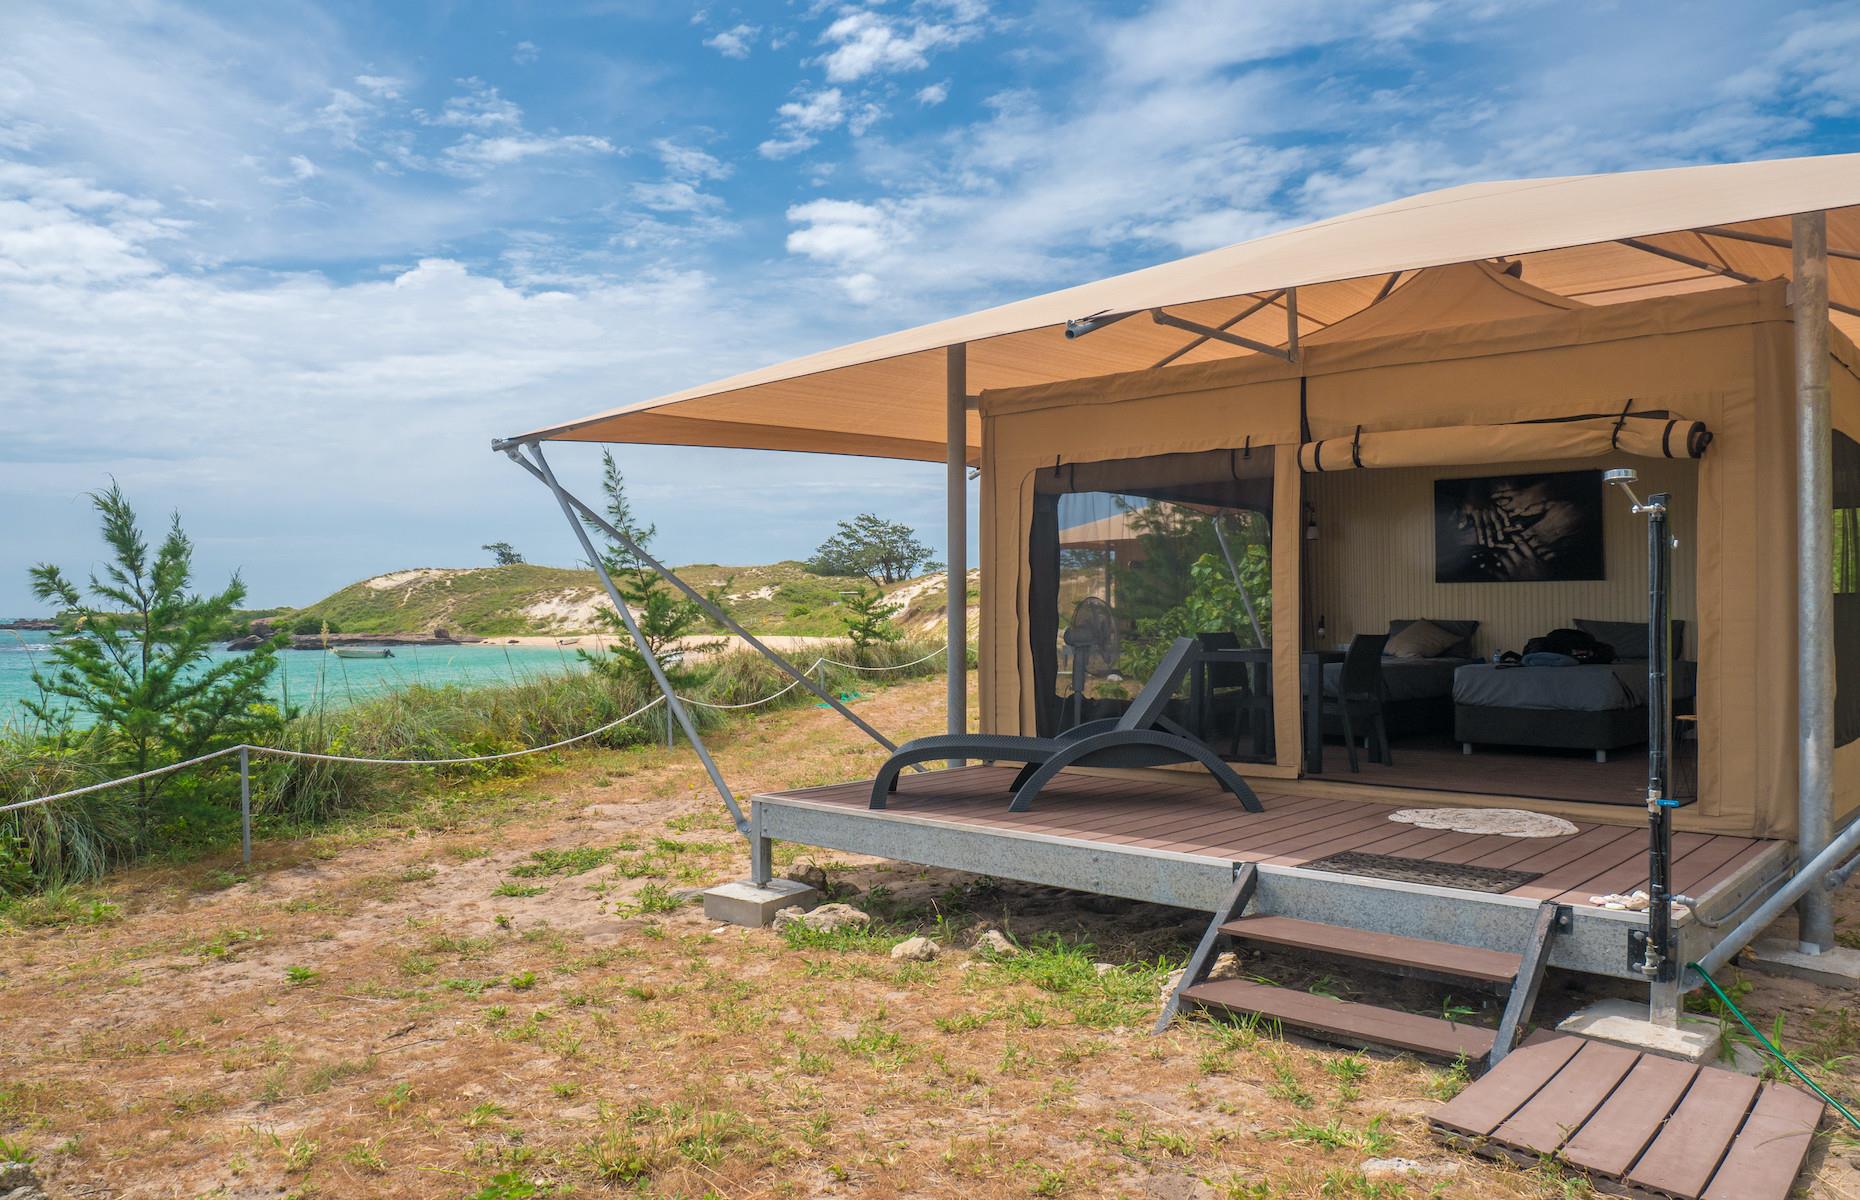 <p>There’s something seriously special about staying somewhere very few others have heard of, let alone will ever visit. <a href="https://www.banubanu.com">This off-the-beaten-track beachside camp</a> is one such place. Set at the northern tip of Bremer Island, off the coast of East Arnhem Land, it was built in partnership with the Yolngu people. Guests at Banubanu sleep in either breezy beachfront bungalows or a penthouse bungalow, all with incredible views of the Arafura Sea.</p>